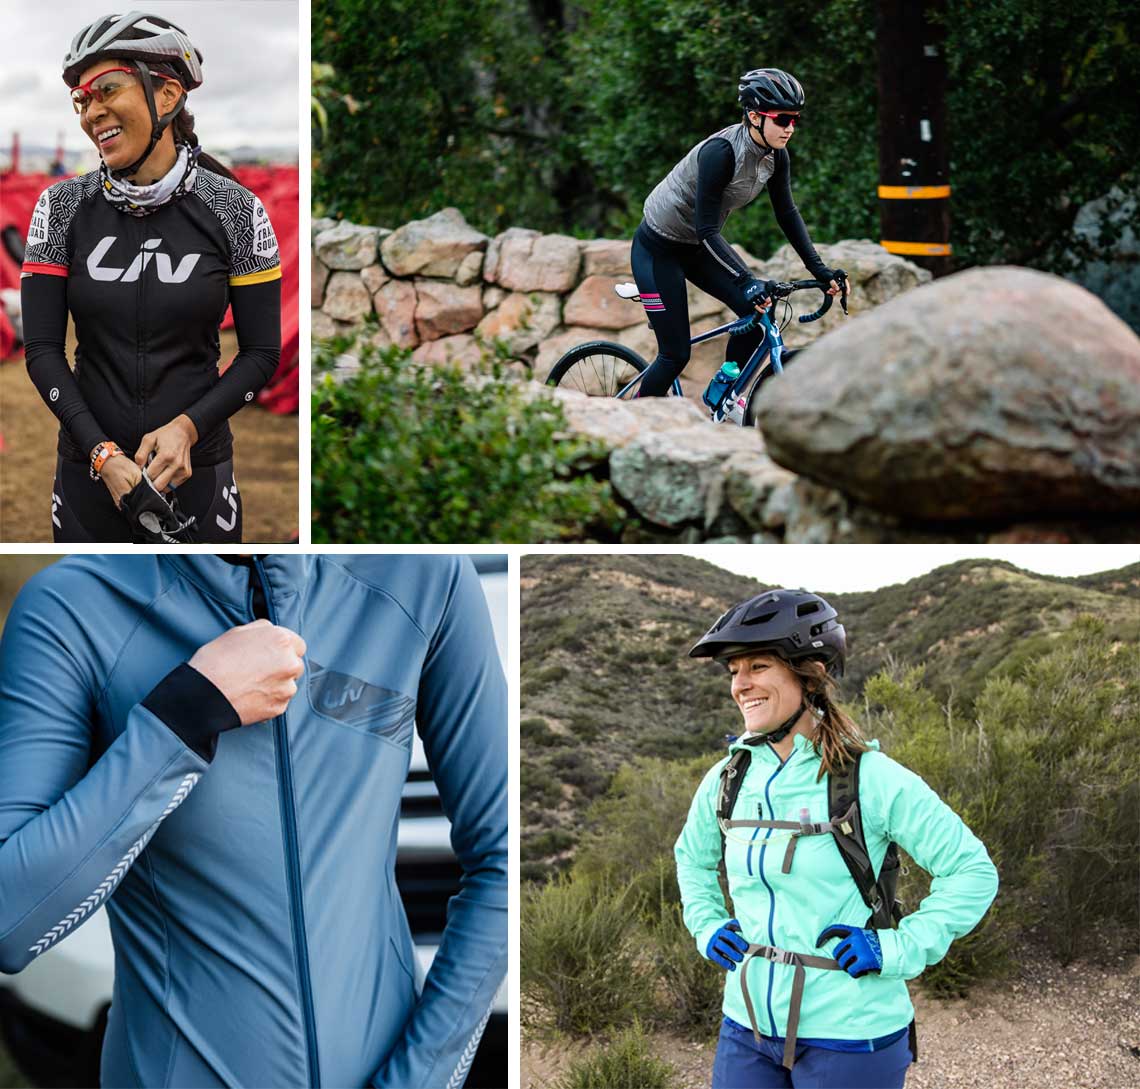 Layer up for your next adventure with our thermal wear! Enjoy a